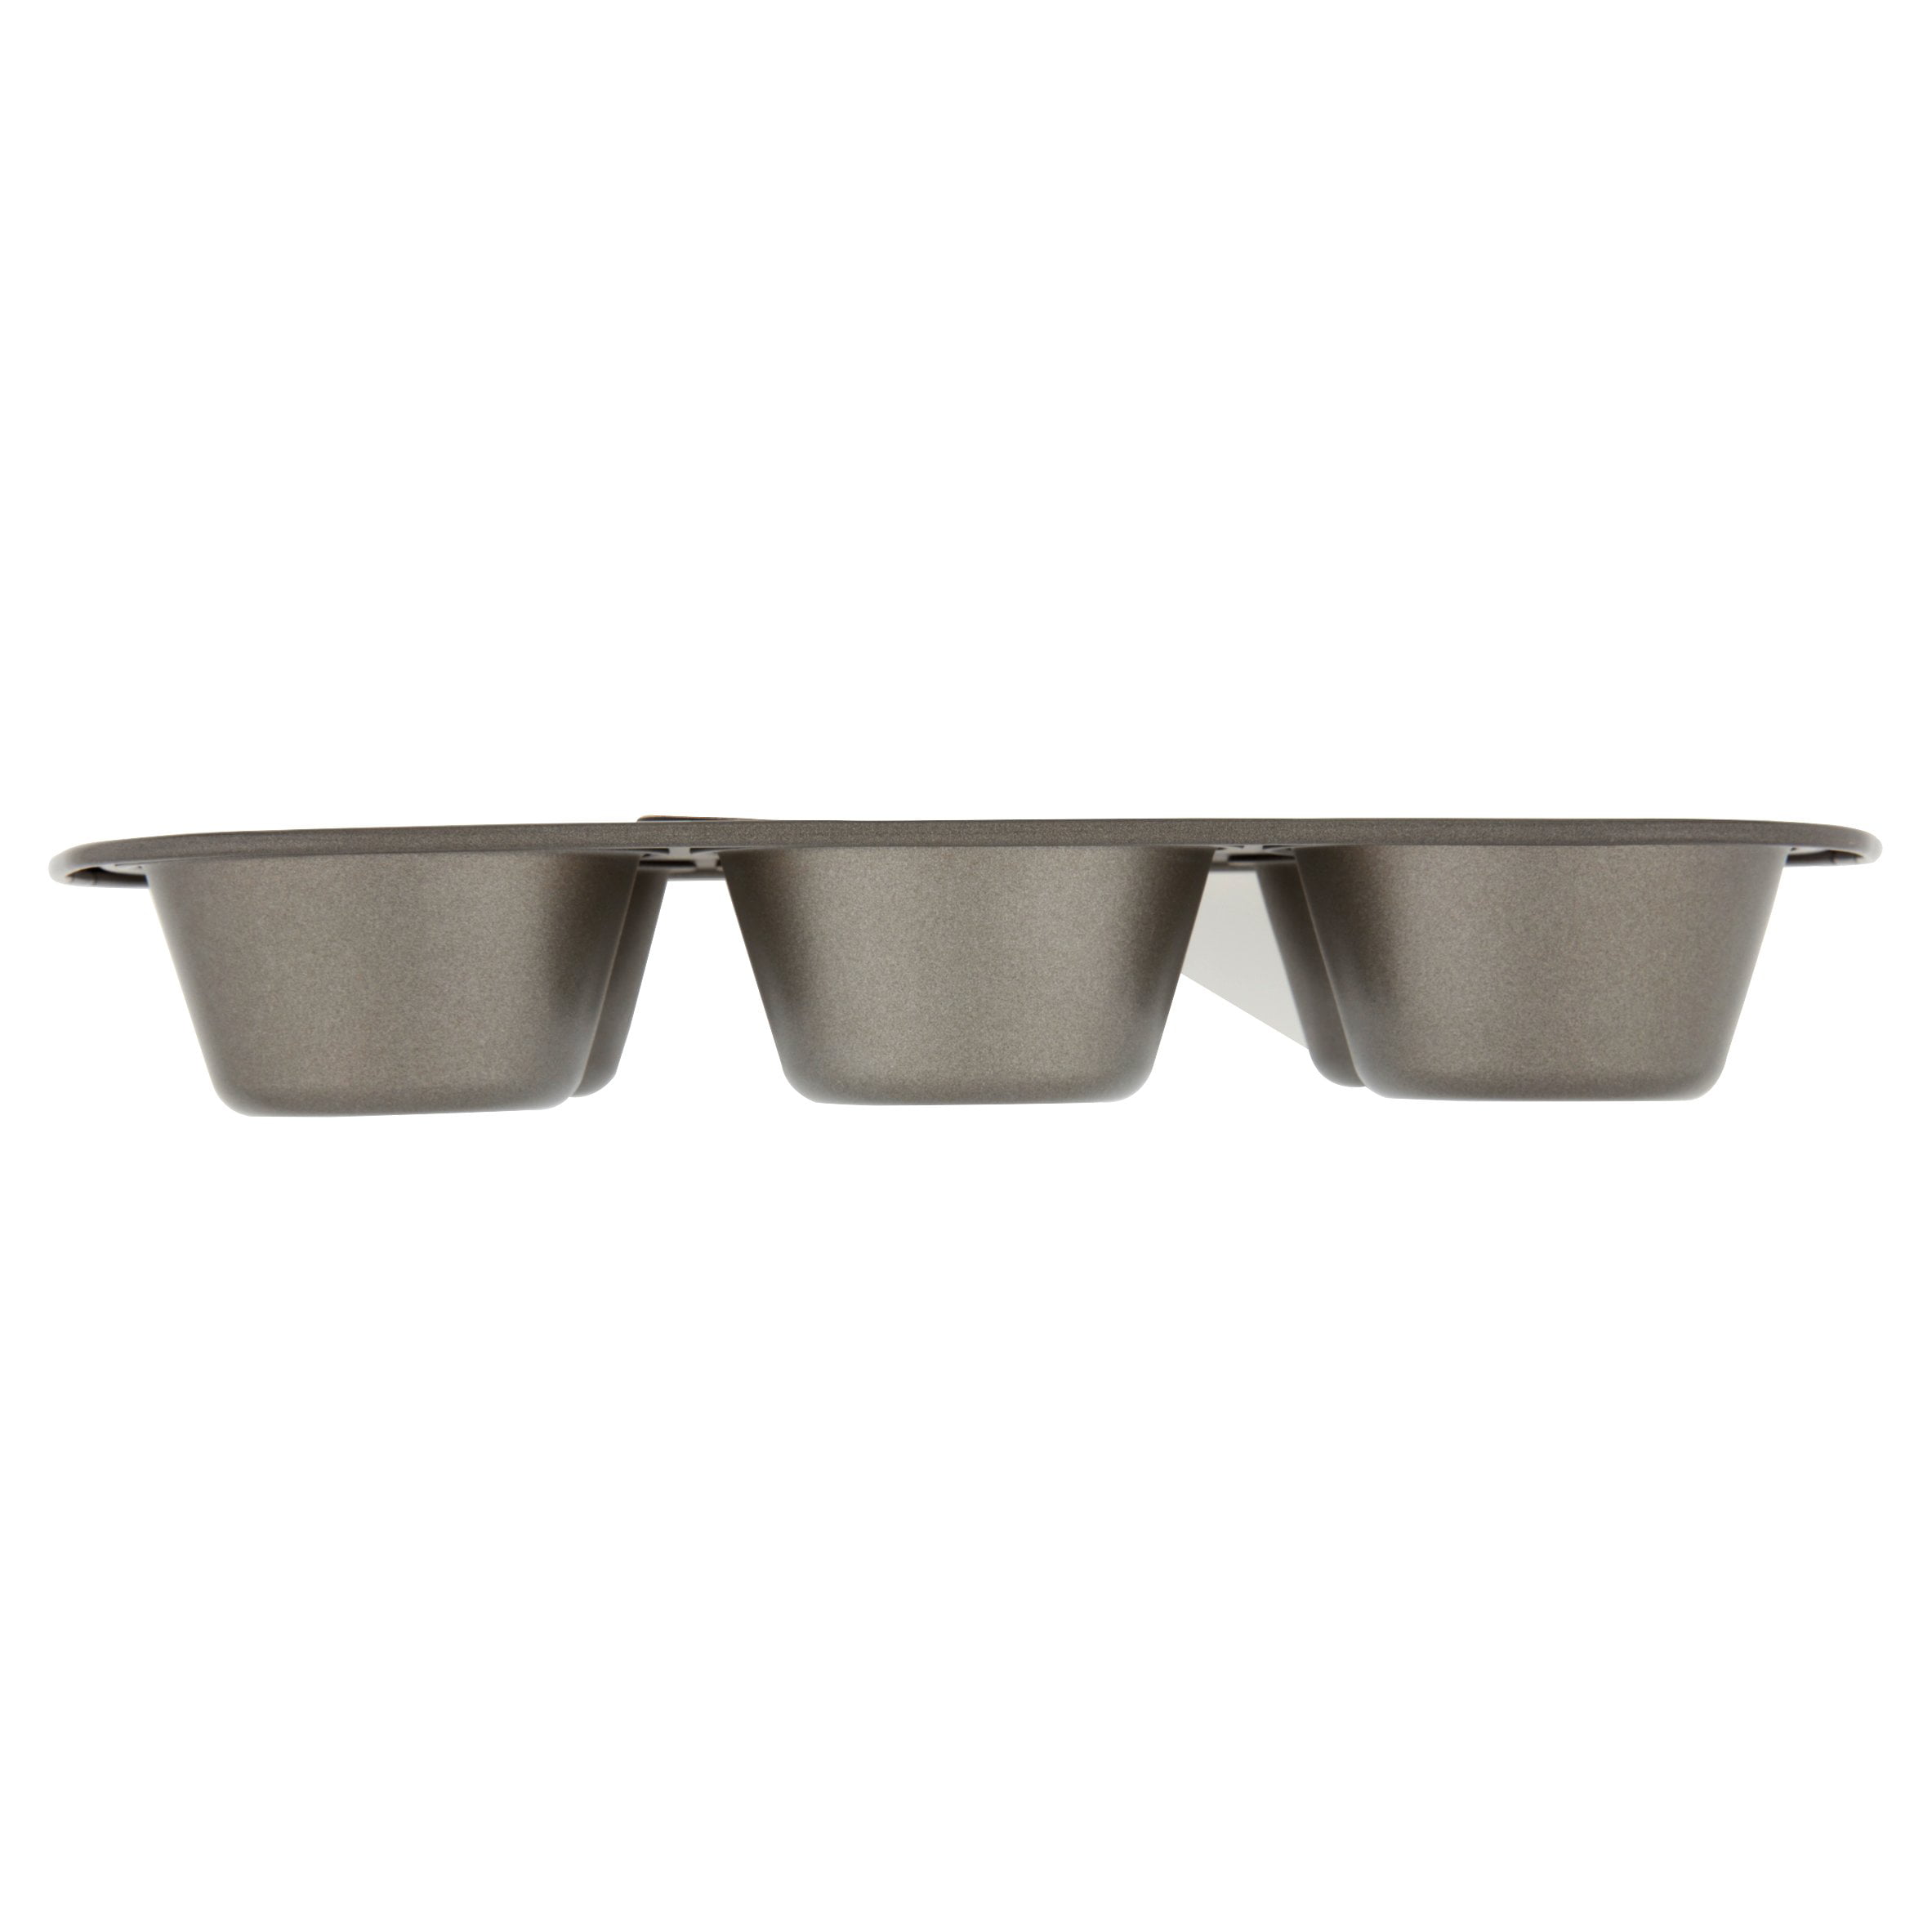 Pampered Chef Large Muffin Pan  Large muffin pans, Jumbo muffin pans, Muffin  pan